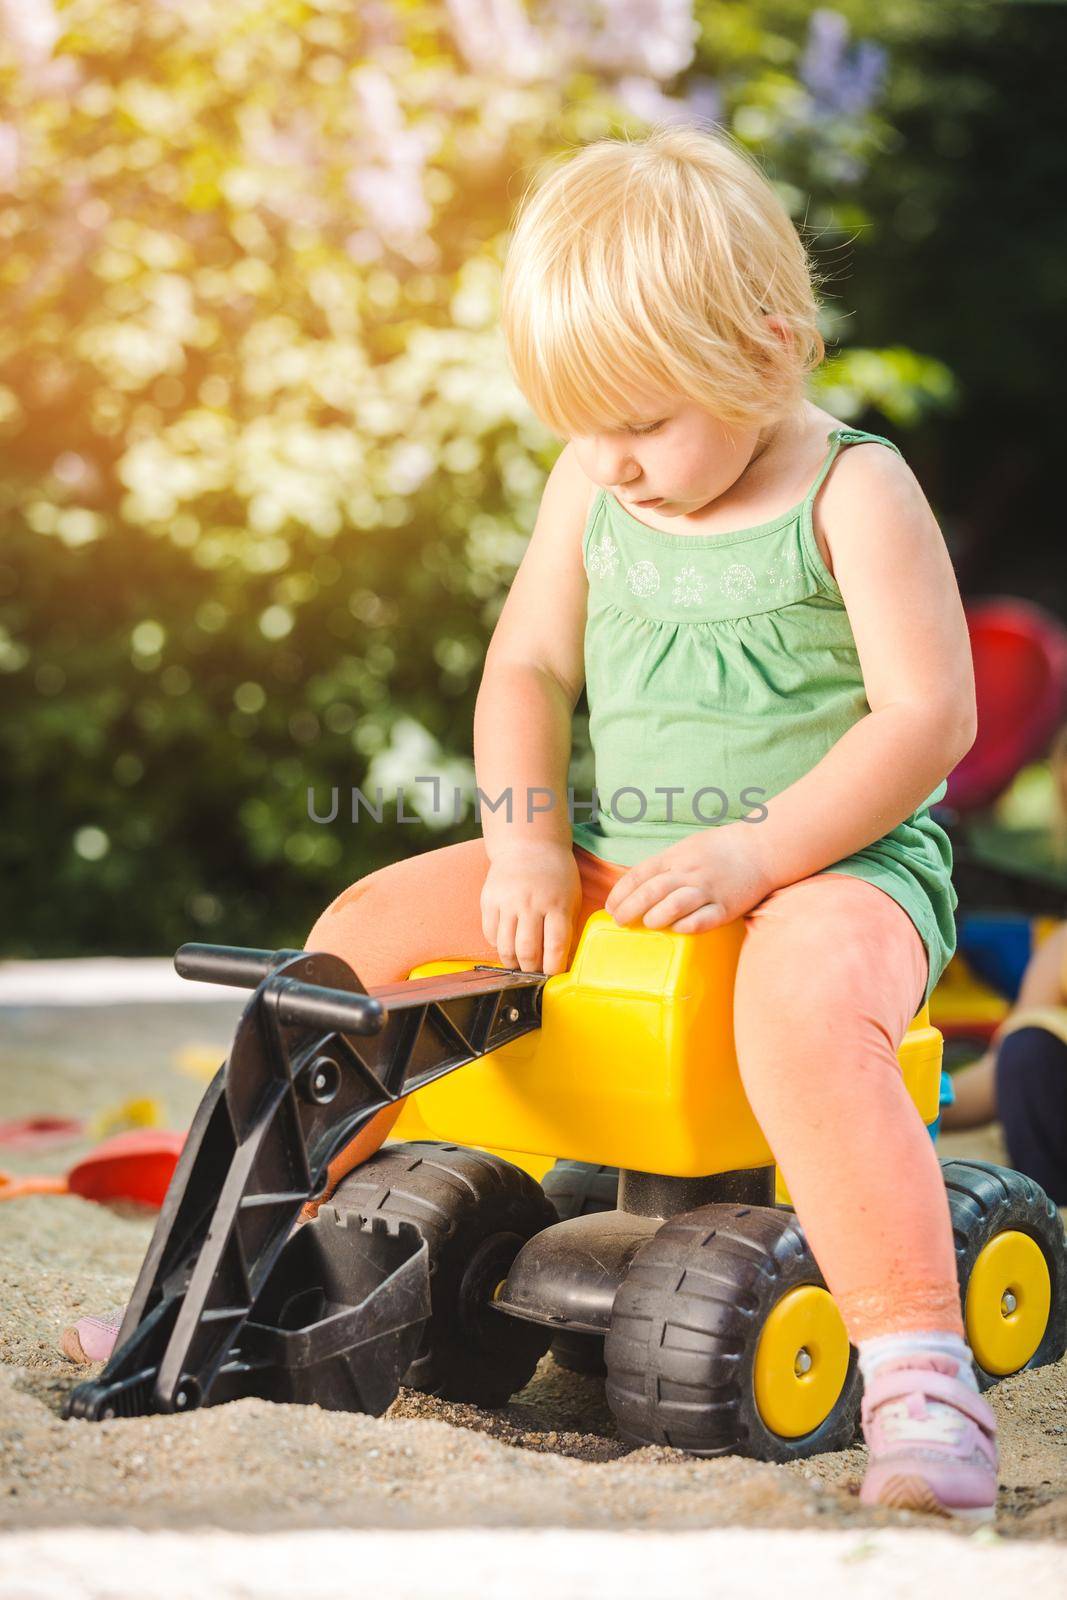 Child riding on a toy tractor on playground by Kzenon